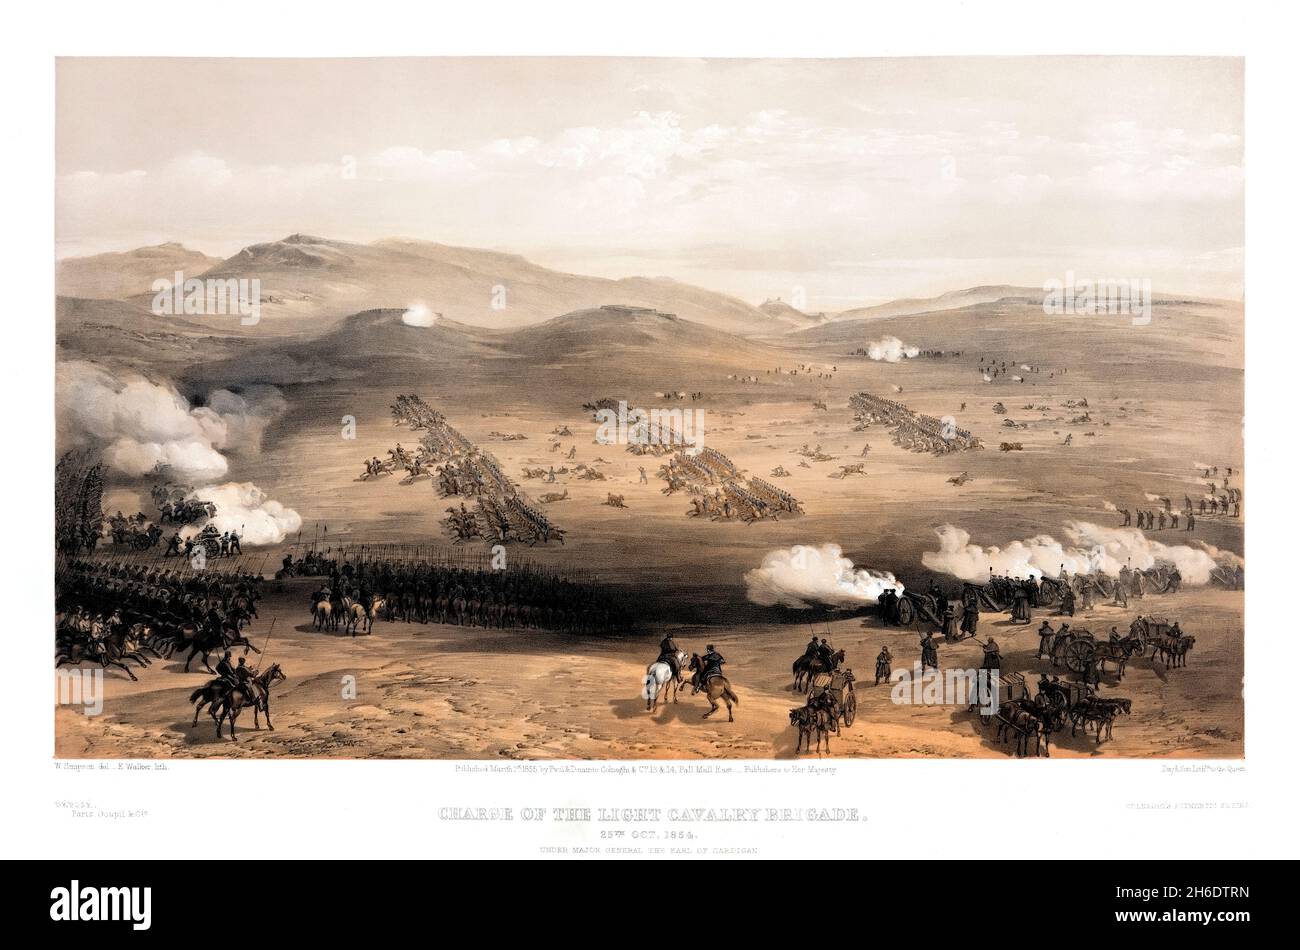 Charge of the light cavalry brigade, 25th Oct. 1854, under Major General the Earl of Cardigan. The Charge of the Light Brigade at Balaklava by William Simpson (1855), illustrating the Light Brigade's charge into the 'Valley of Death' from the Russian perspective Stock Photo